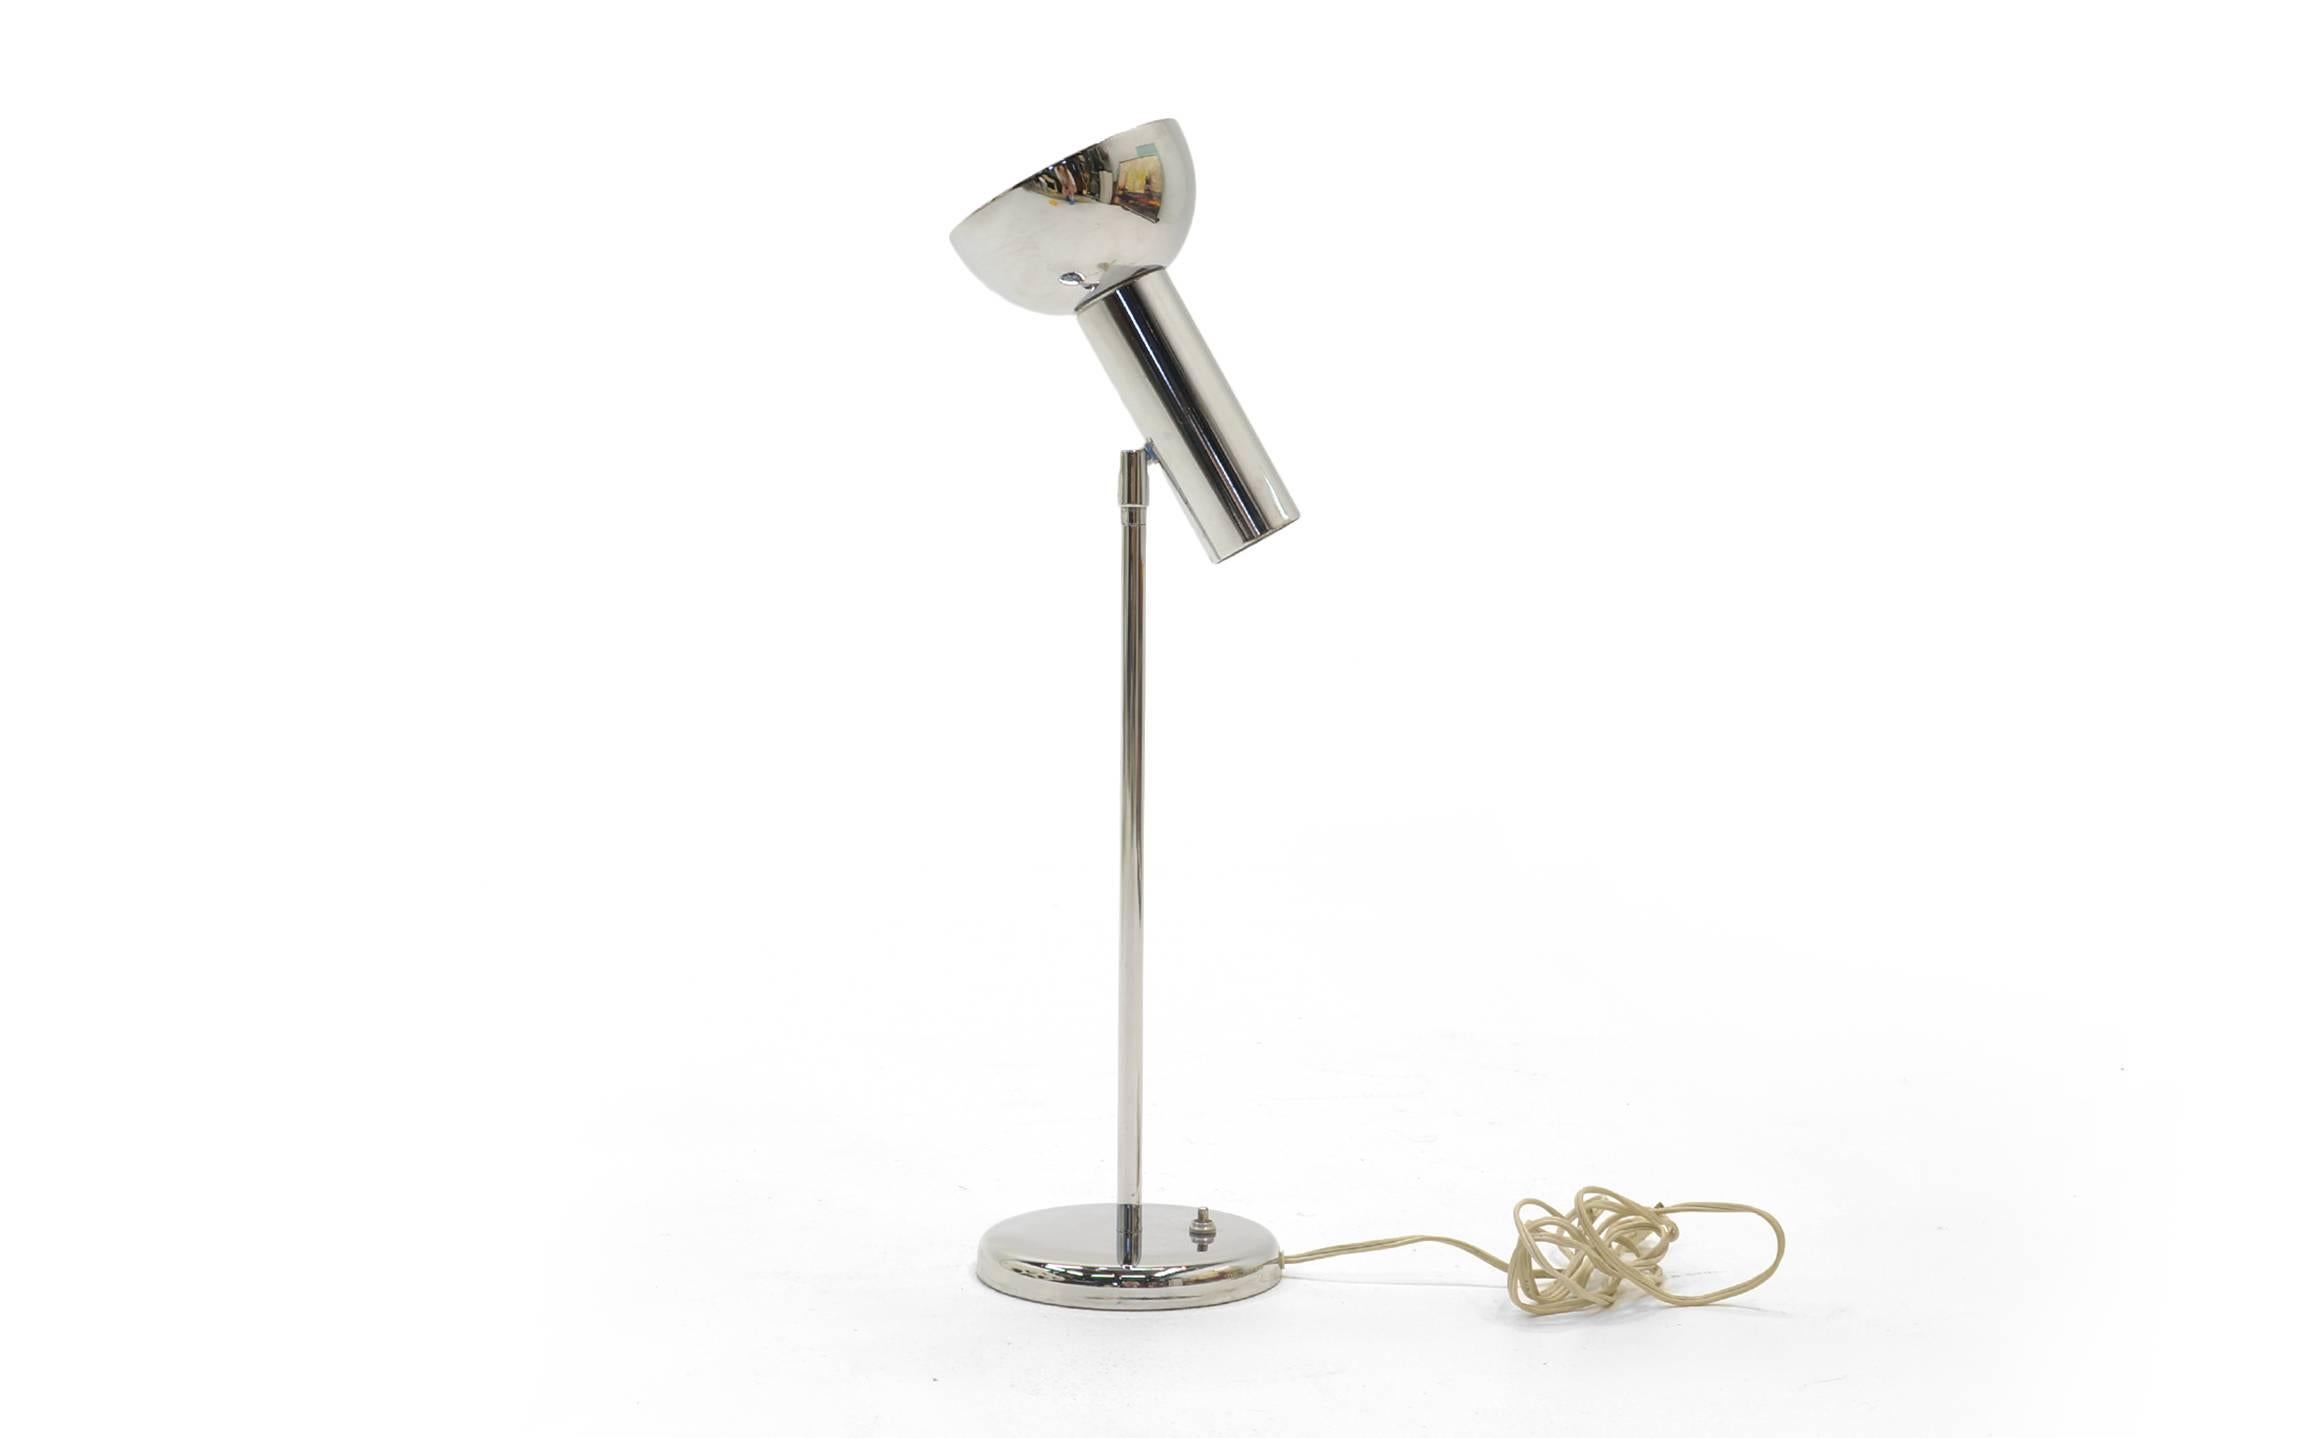 Adjustable table lamp designed by George Kovacs in polished chromed steel. Perfect as a reading lamp or accent lamp.